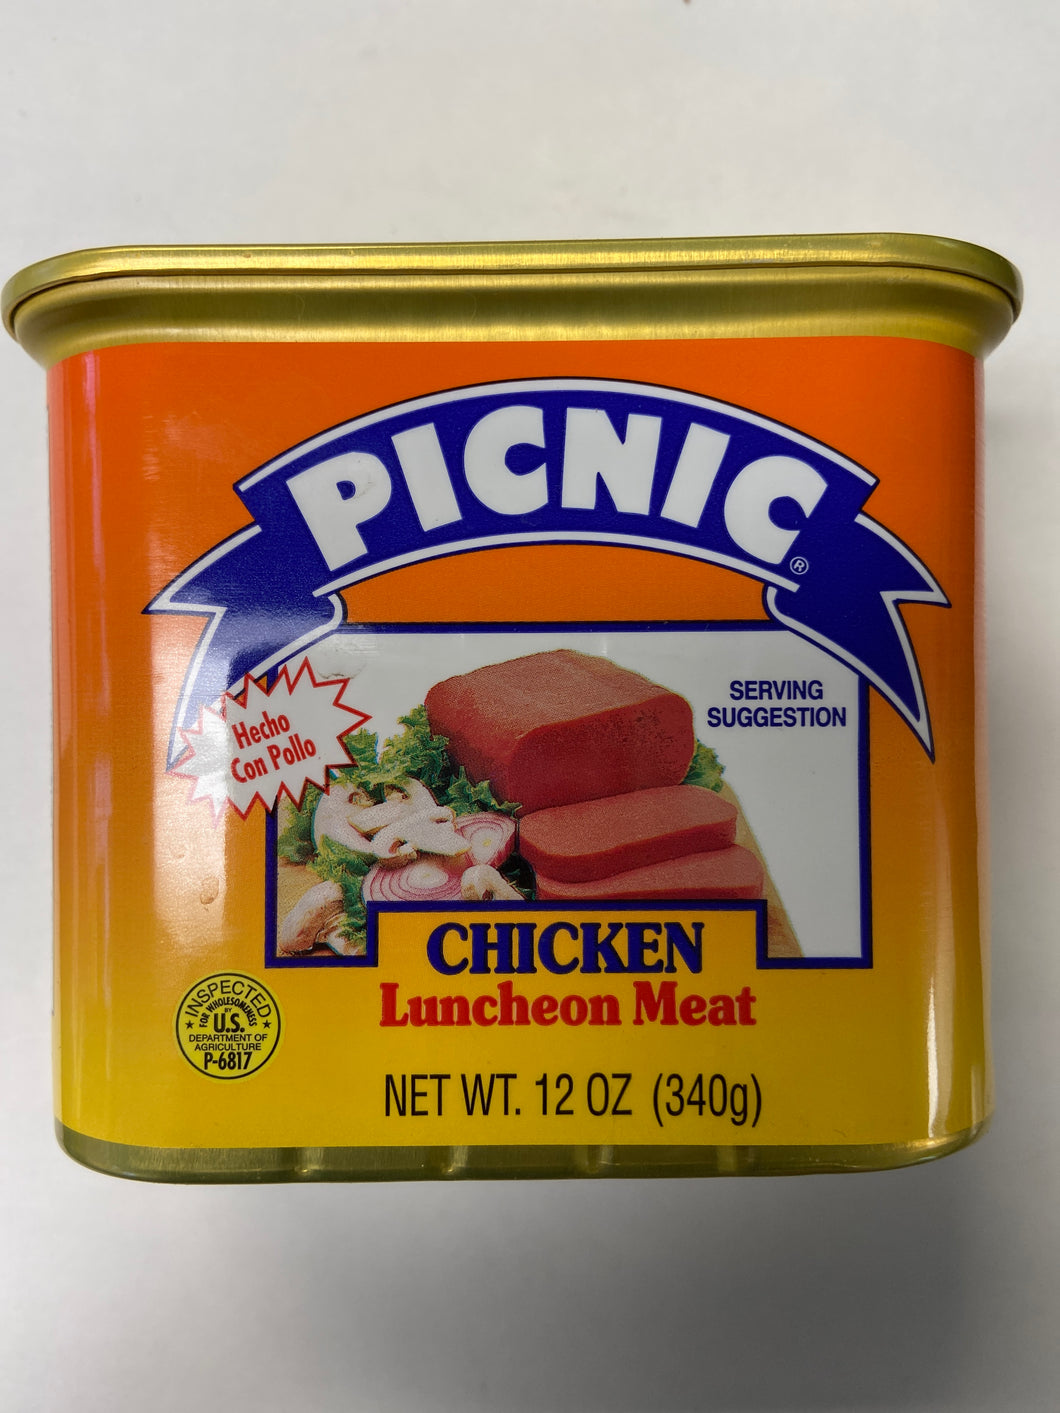 Luncheon Meat, Chicken, Picnic